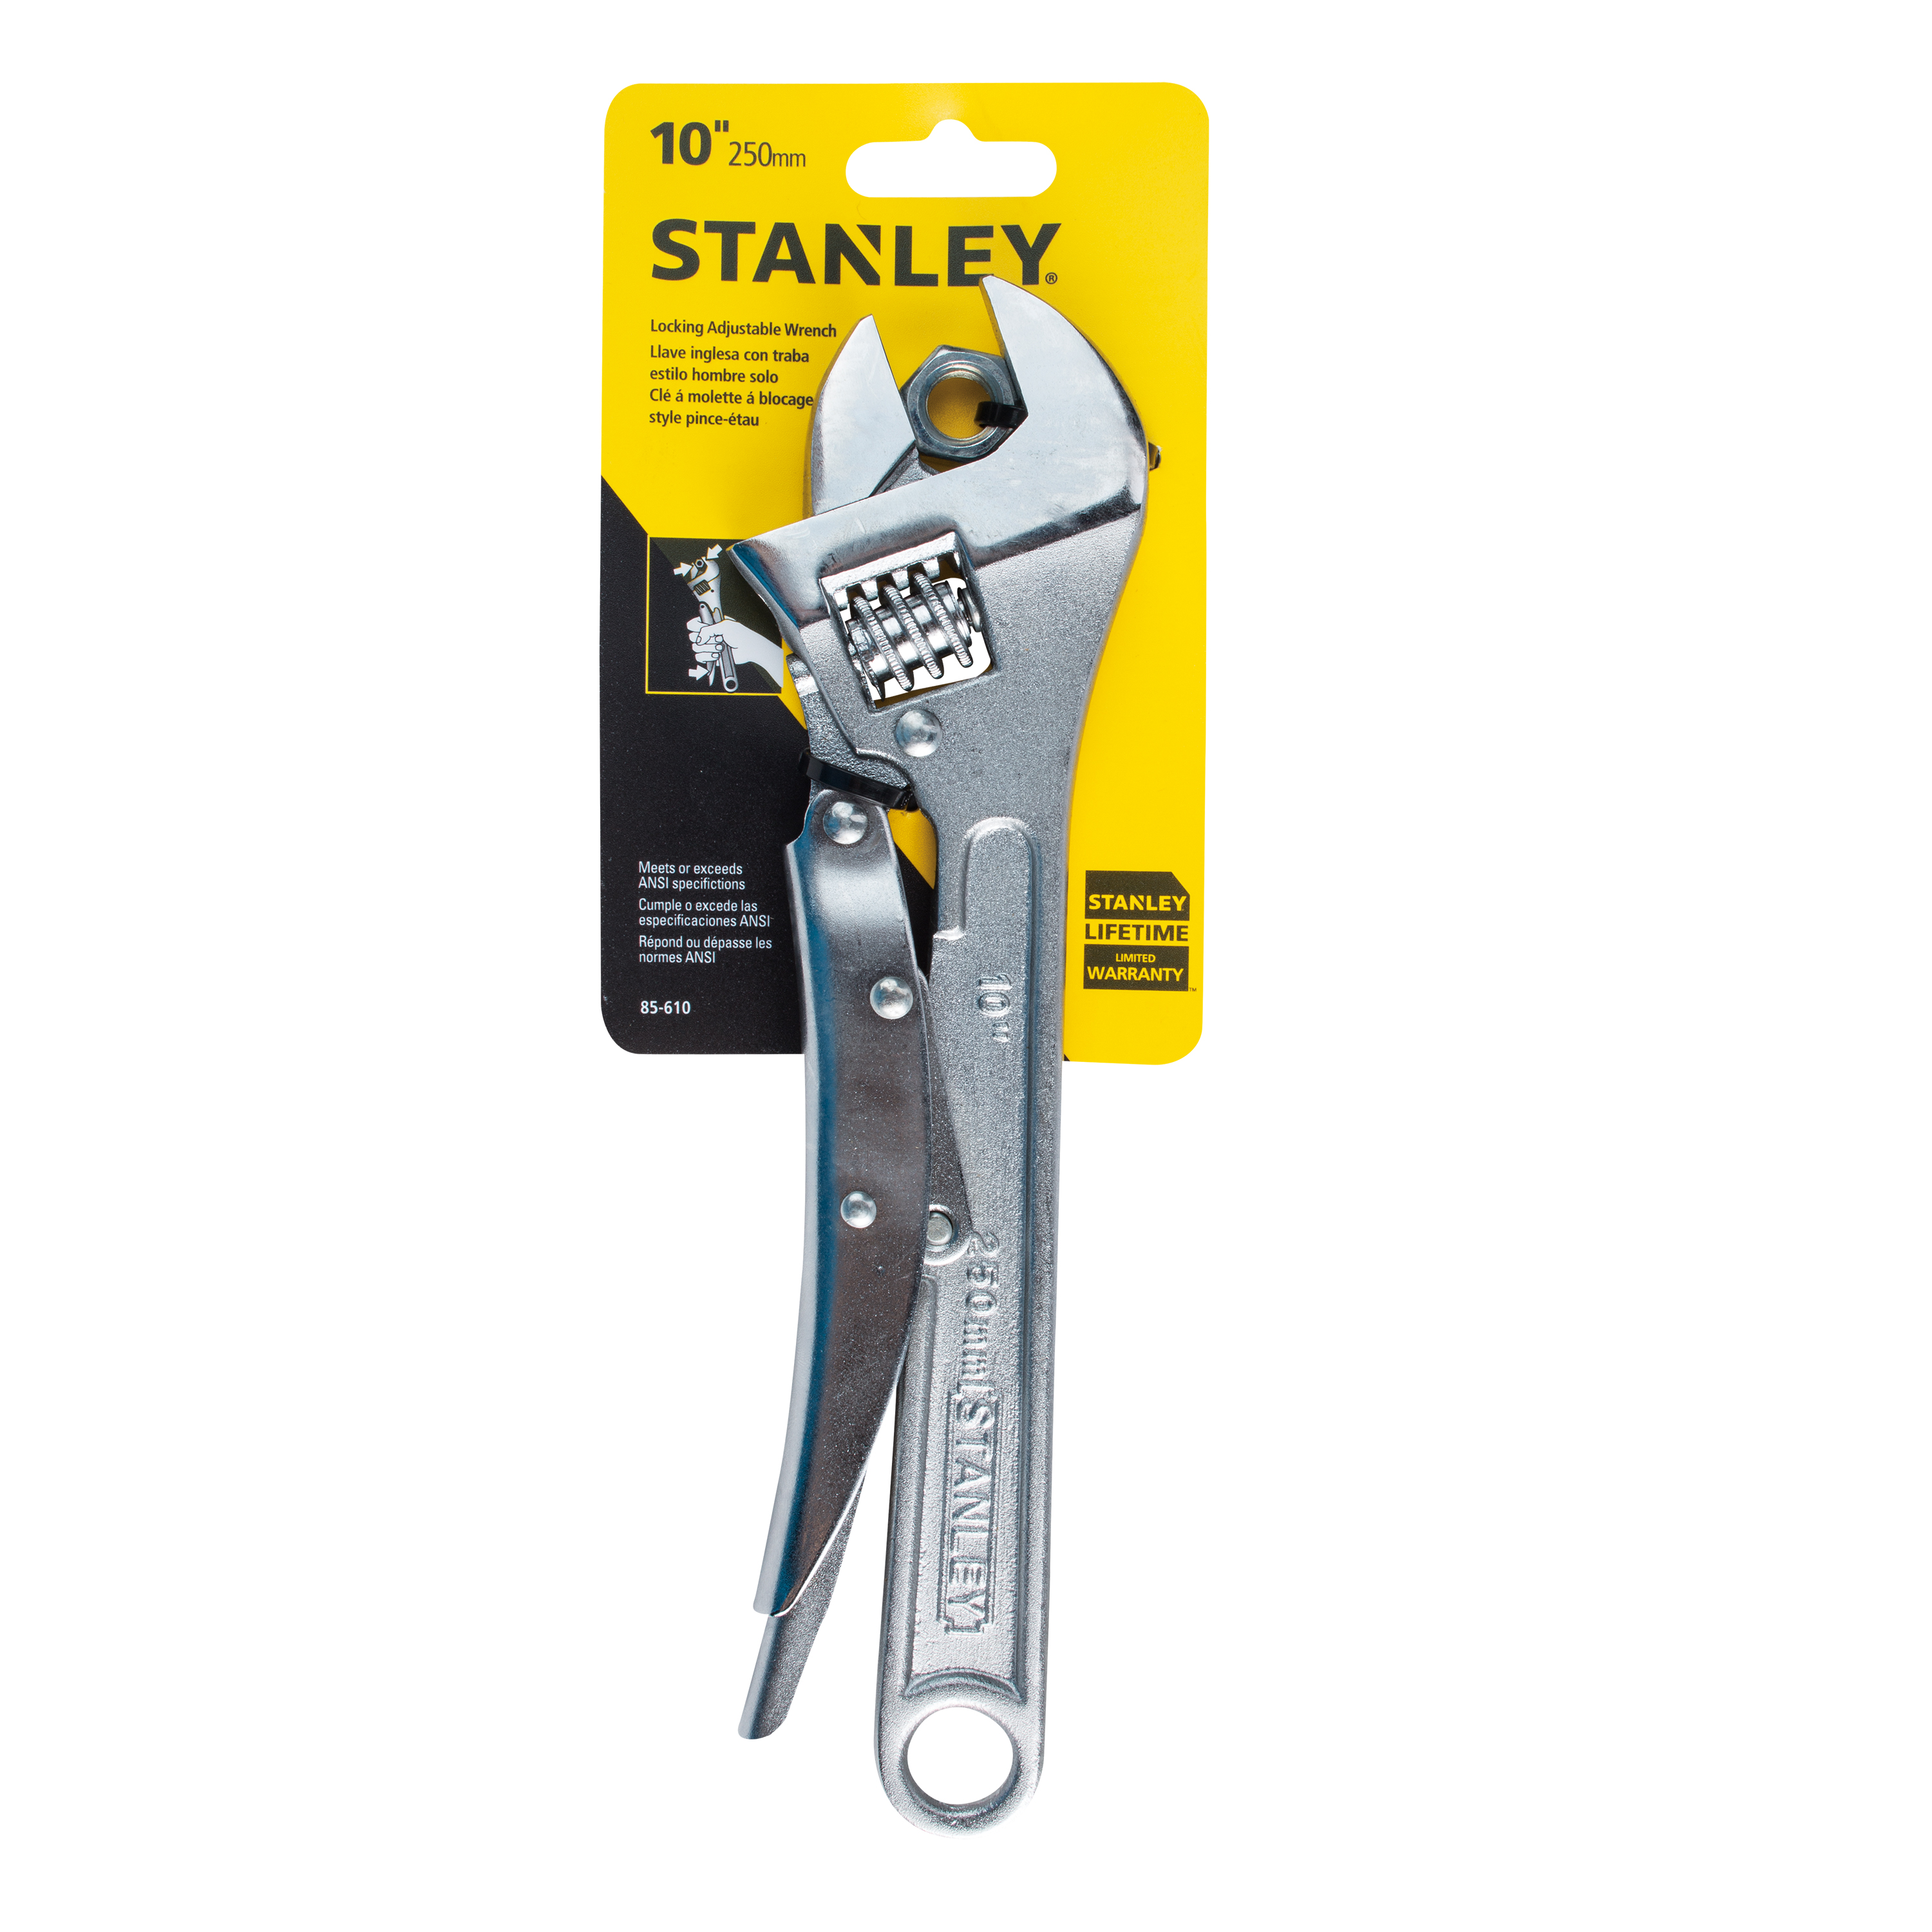 STANLEY 85-610W - 10'' Locking Adjustable Wrench - image 1 of 4